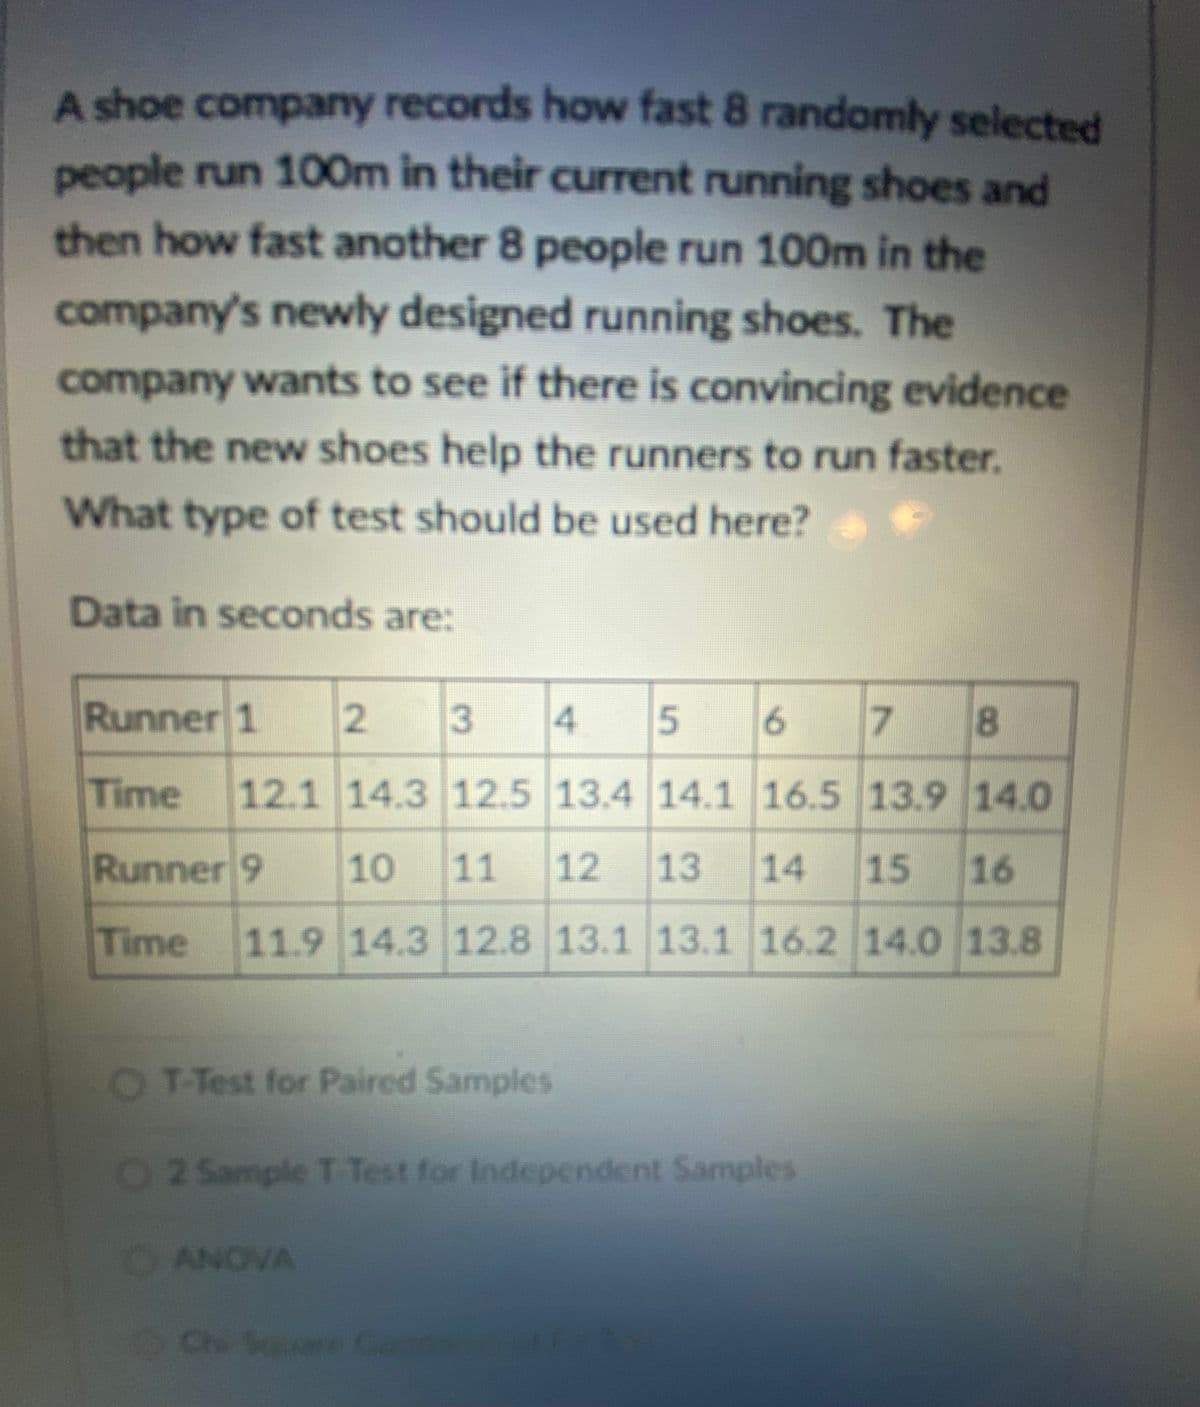 A shoe company records how fast 8 randomly selected
people run 100m in their current running shoes and
then how fast another 8 people run 100m in the
company's newly designed running shoes. The
company wants to see if there is convincing evidence
that the neww shoes help the runners to run faster.
What type of test should be used here?
Data in seconds are:
Runner 1
2 3
4.
7.
8
Time
12.1 14.3 12.5 13.4 14.1 16.5 13.9 14.0
Runner 9
10
11
12
13
14
15 16
Time
11.9 14.3 12.8 13.1 13.1 16.2 14.0 13.8
OT-Test for Paired Samples
O2 Sample T Test for Independent Samples
OANOVA
Ch Su
are Cand
5.
